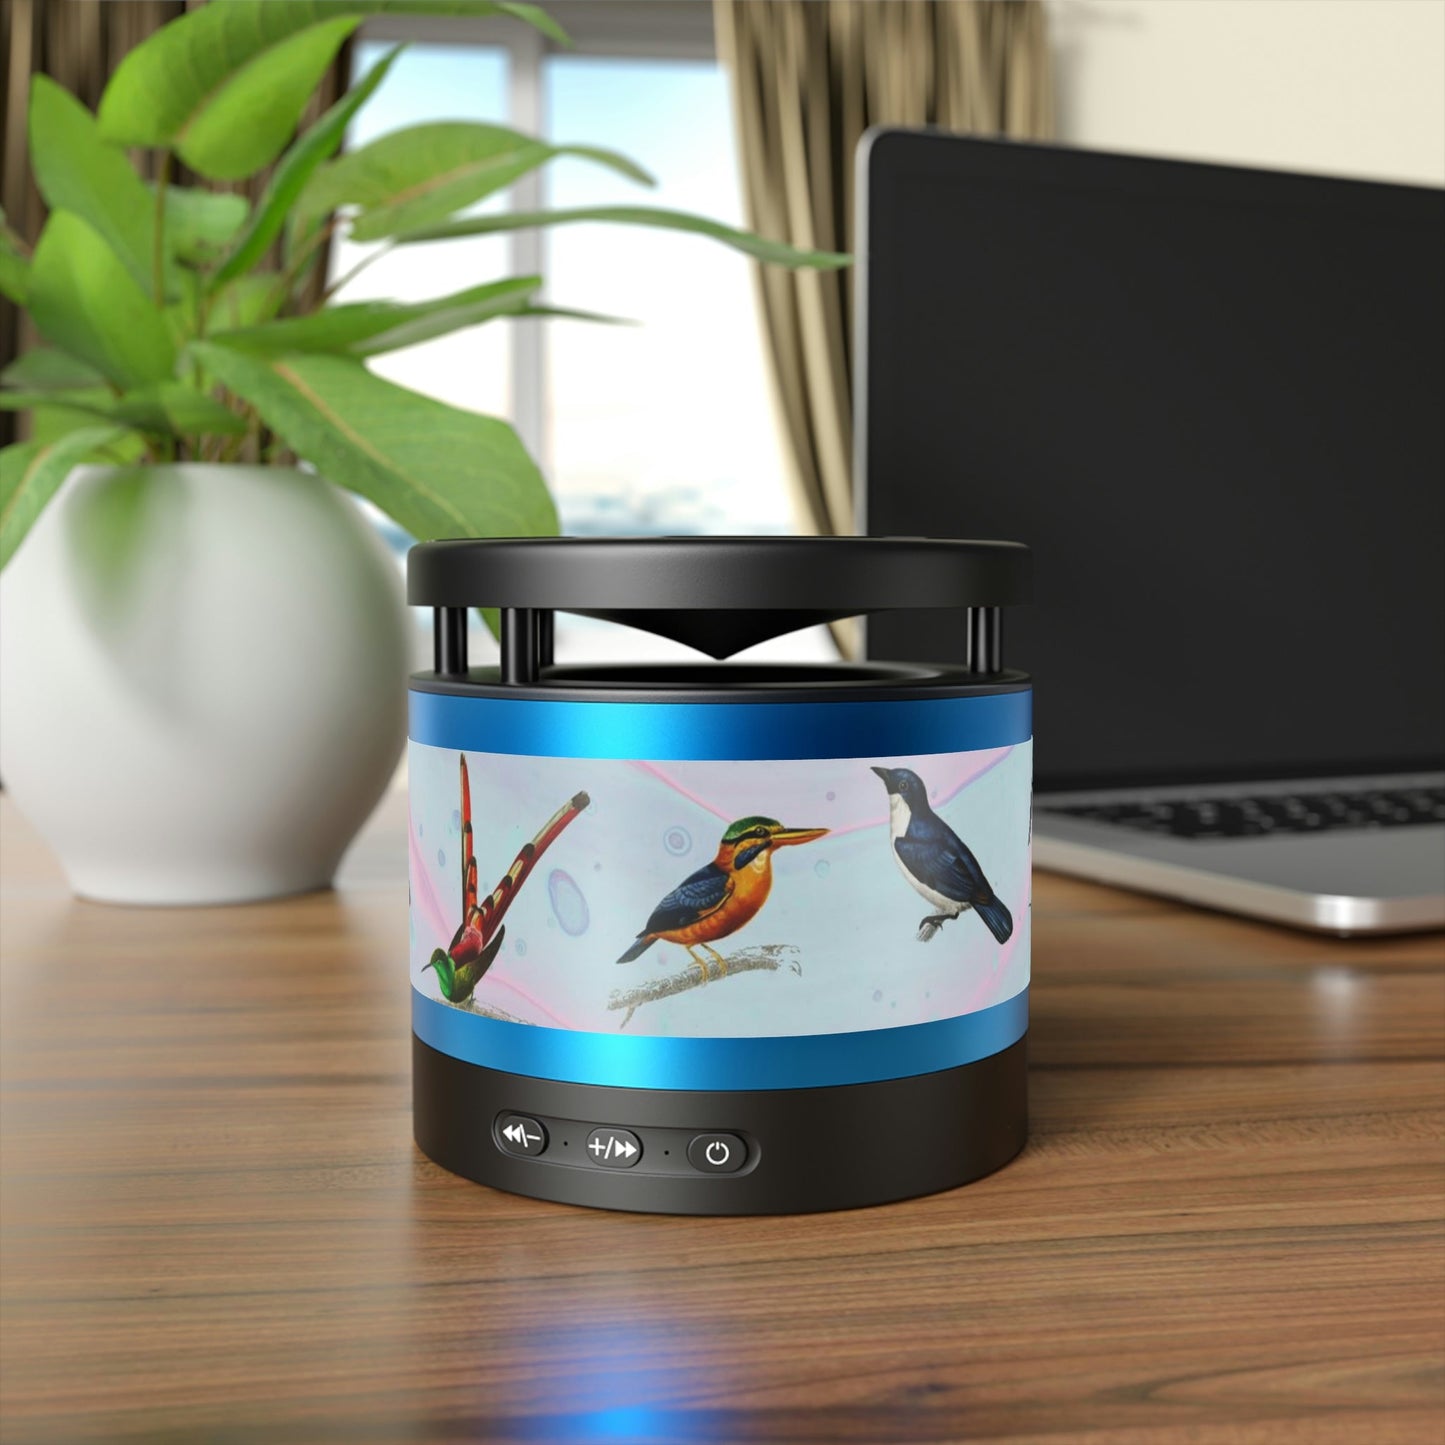 The Birds Metal Bluetooth Speaker and Wireless Charging Pad